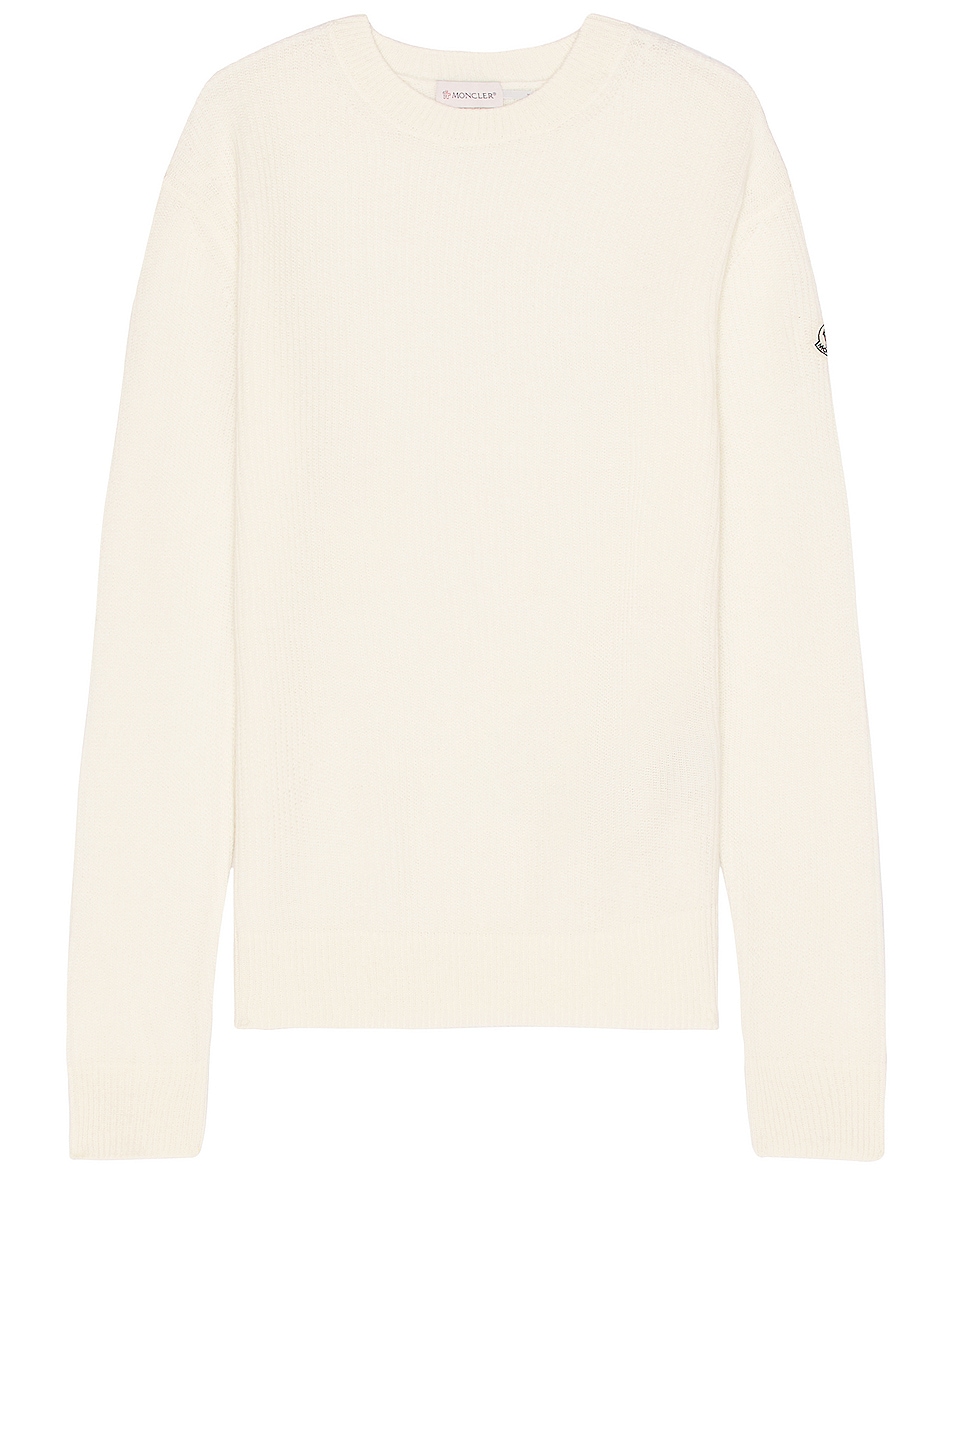 Image 1 of Moncler Crewneck Sweater in White